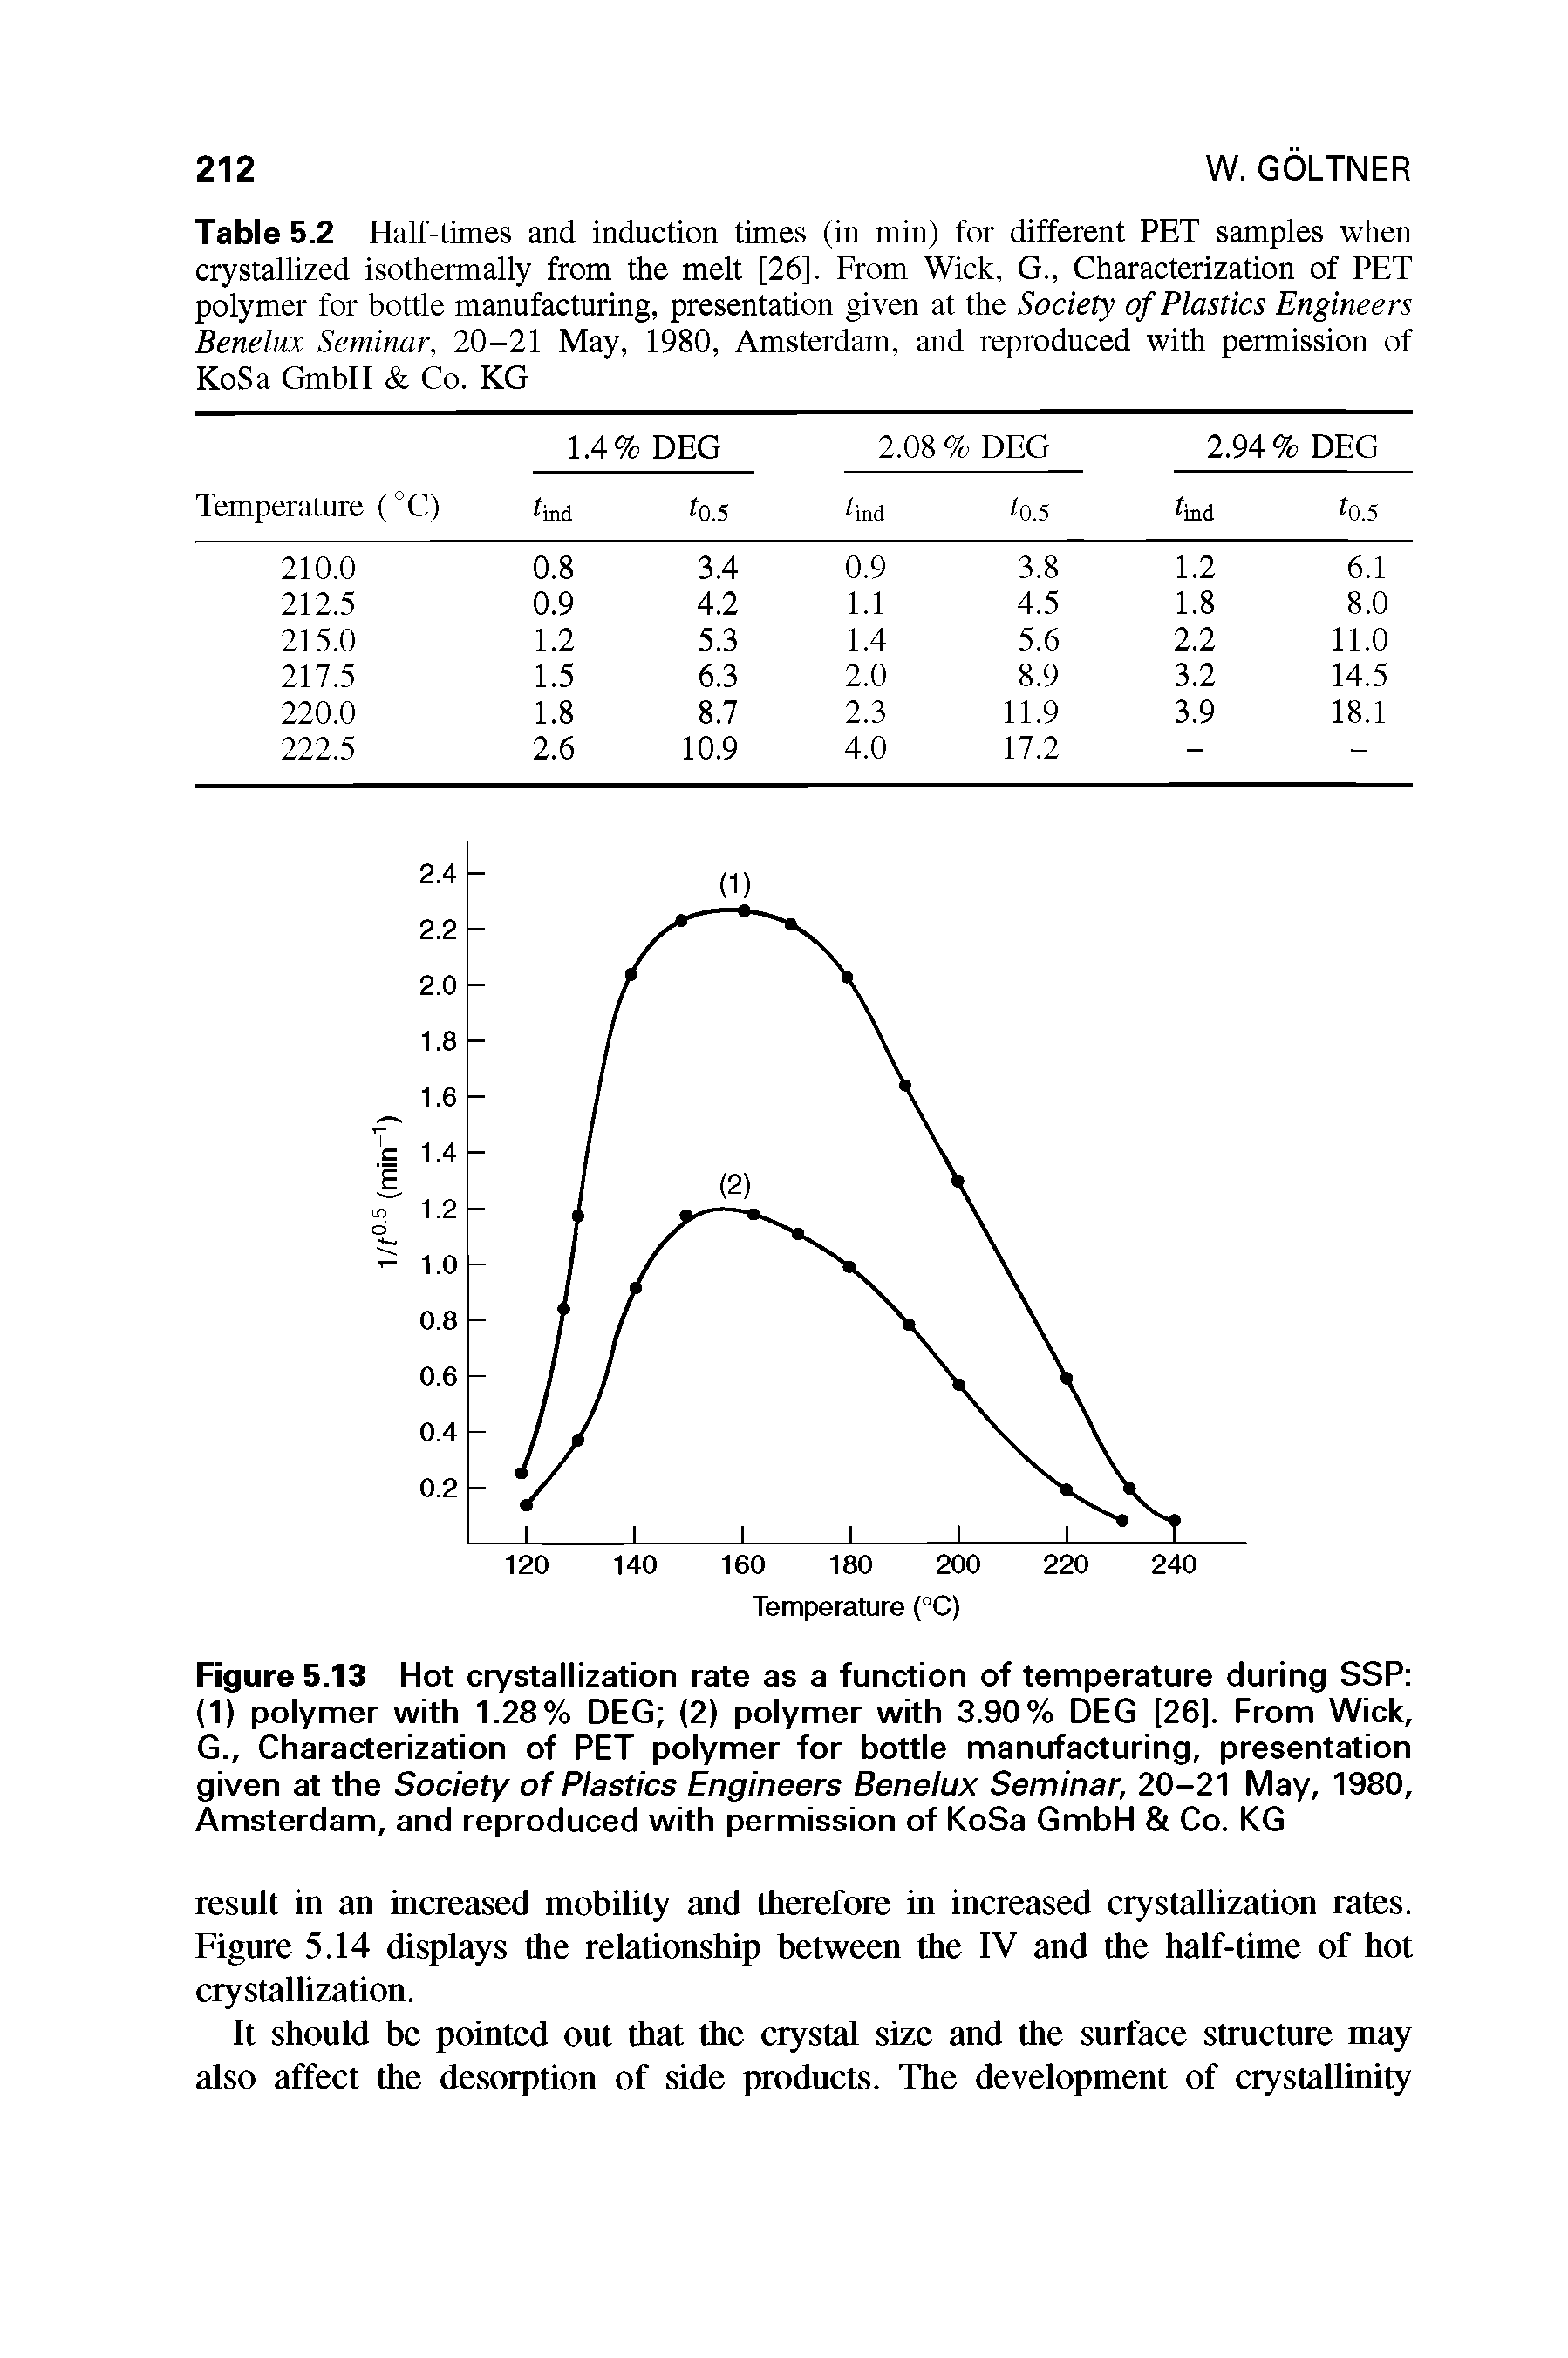 Table 5.2 Half -times and induction times (in min) for different PET samples when crystallized isothermally from the melt [26]. From Wick, G., Characterization of PET polymer for bottle manufacturing, presentation given at the Society of Plastics Engineers Benelux Seminar, 20-21 May, 1980, Amsterdam, and reproduced with permission of KoSa GmbH Co. KG...